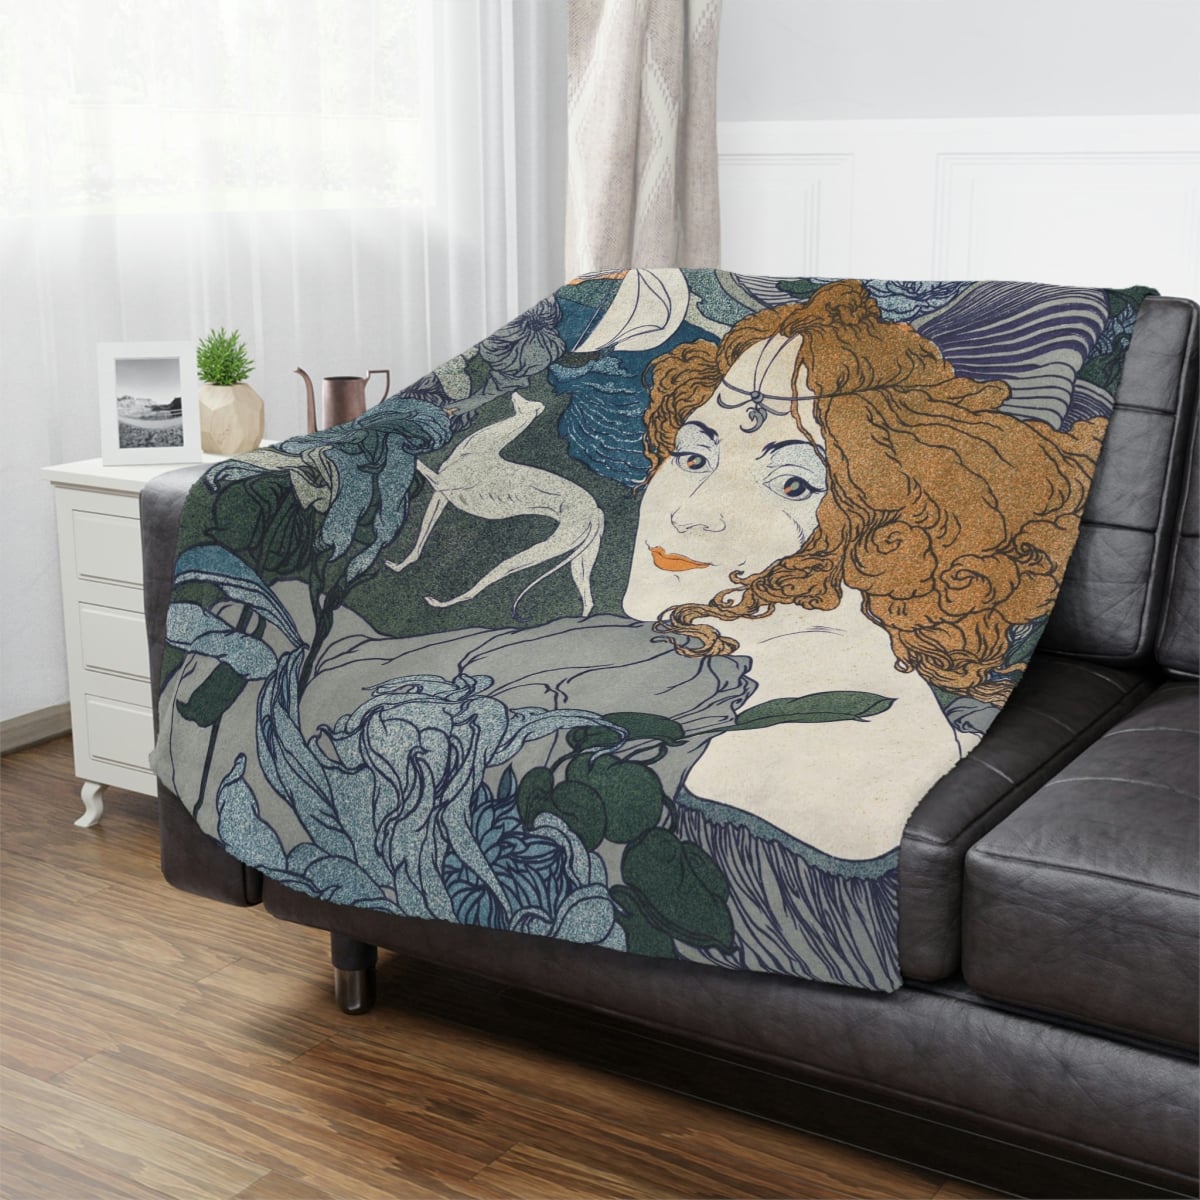 Luxury Textile Blanket with Artistic Home Decor